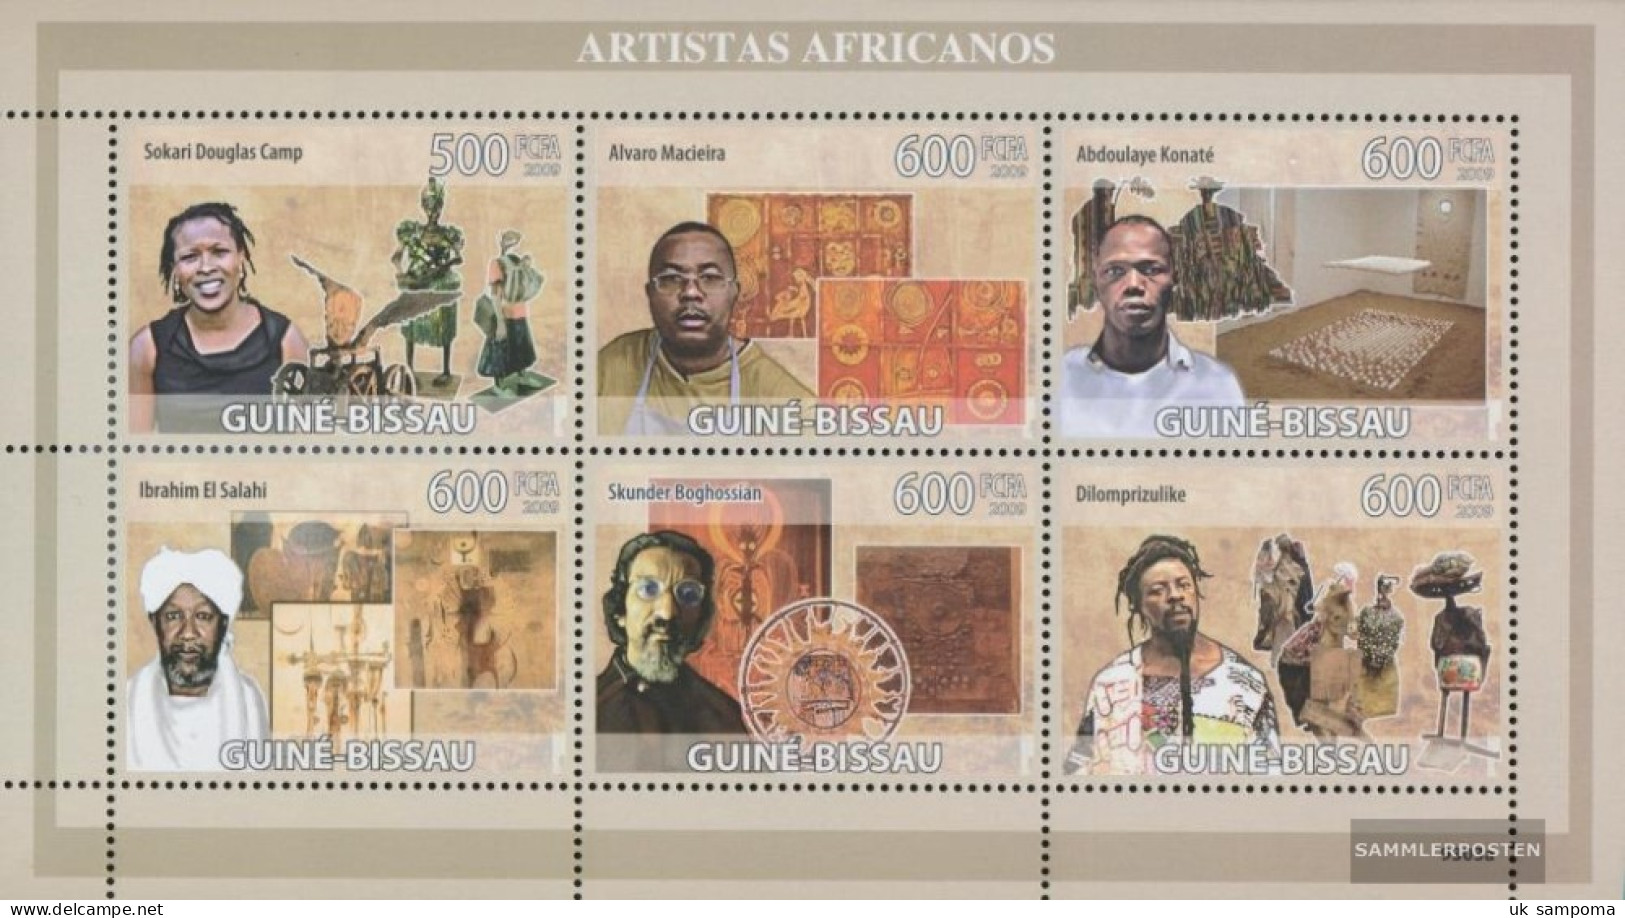 Guinea-Bissau 4258-4263 Sheetlet (complete. Issue) Unmounted Mint / Never Hinged 2009 African Artist - Guinea-Bissau